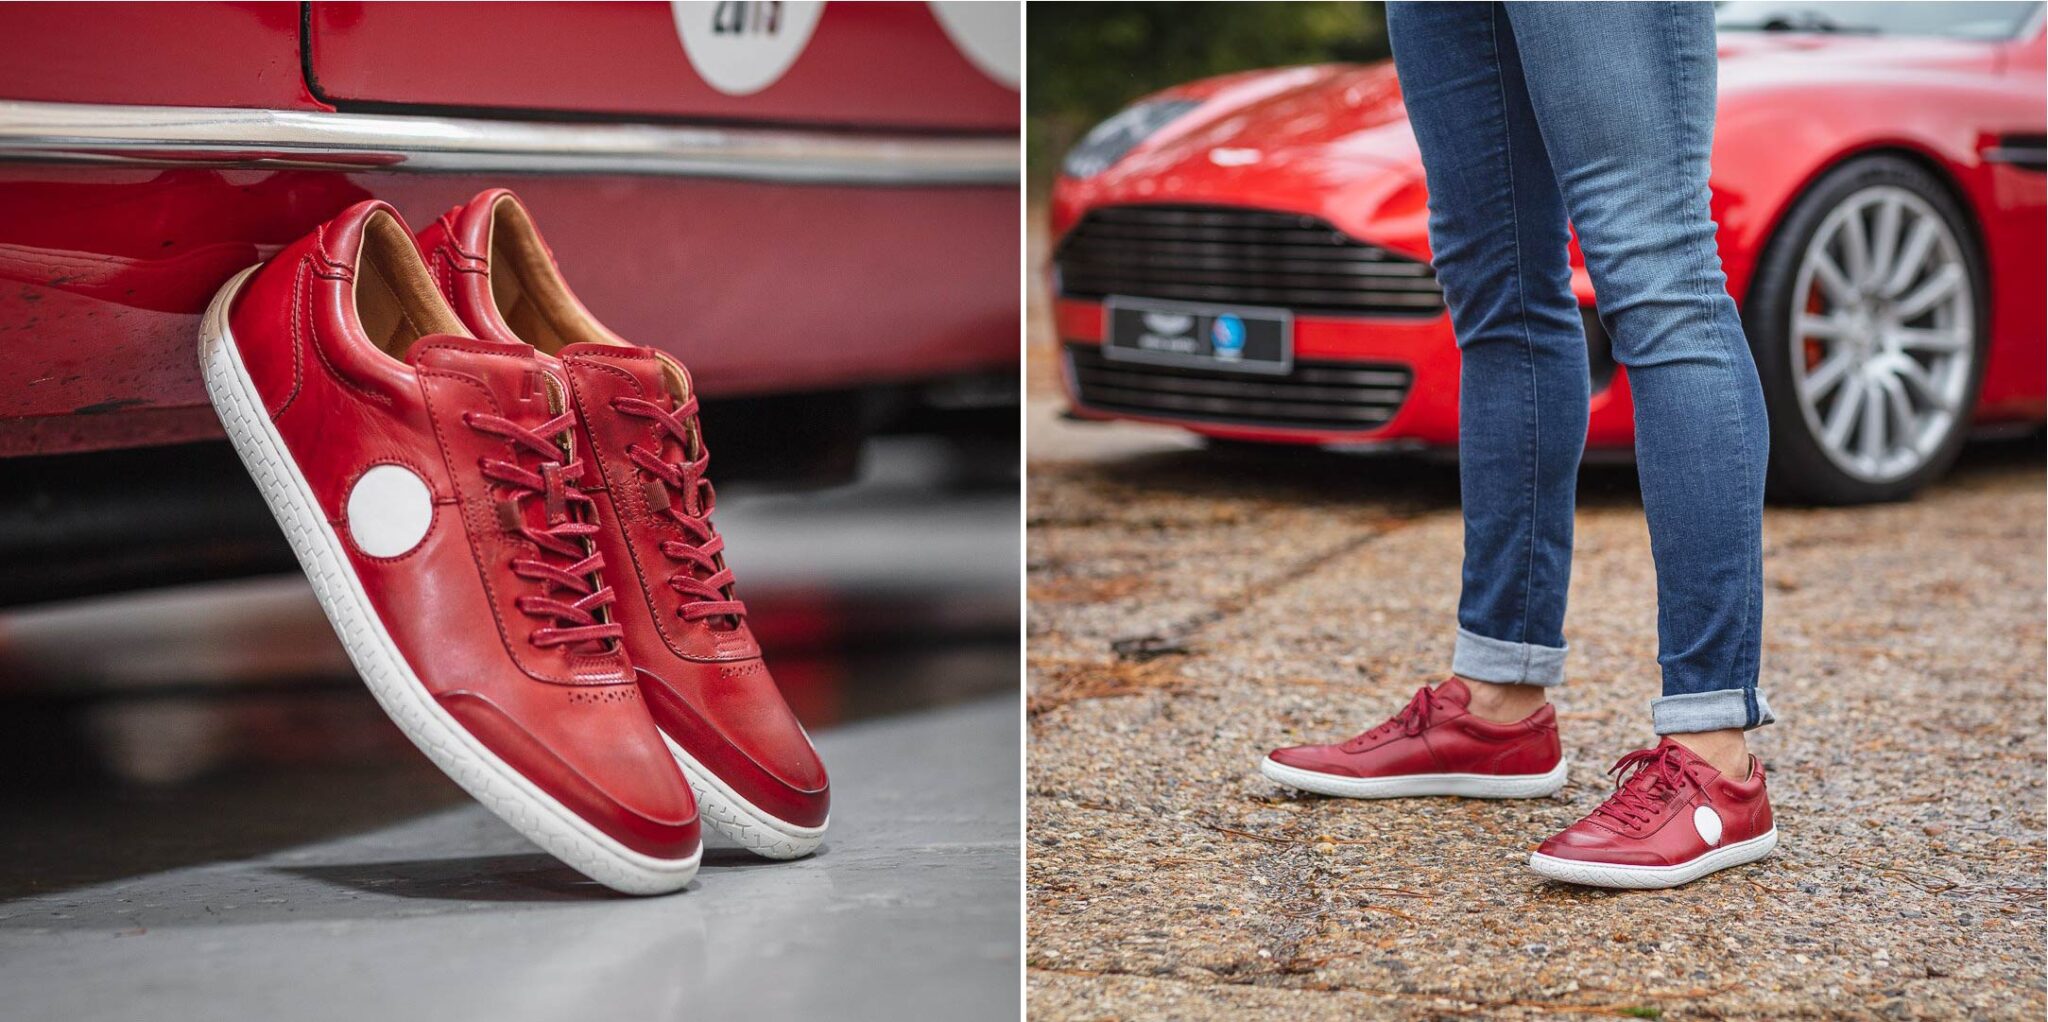 Piloti Avenue – Driving Shoes For The 21st Century